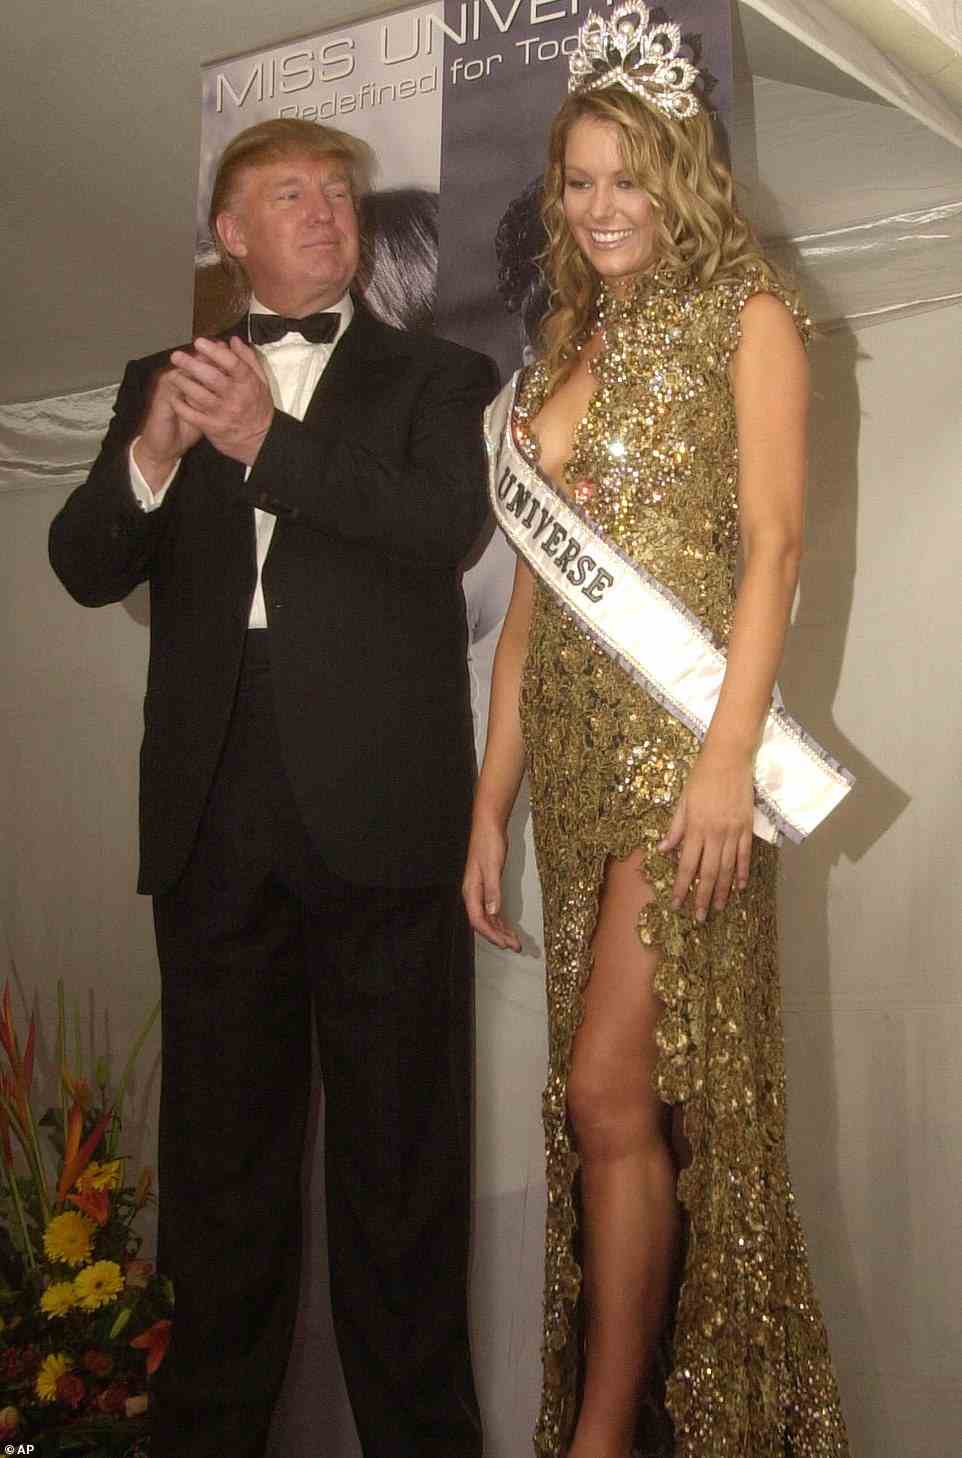 Trump owned the organization for two decades before he sold it in 2015 - and allegations later emerged that he entered the Miss Teen USA changing rooms where girls as young as 15 were getting undressed. He is seen with Miss Universe 2004